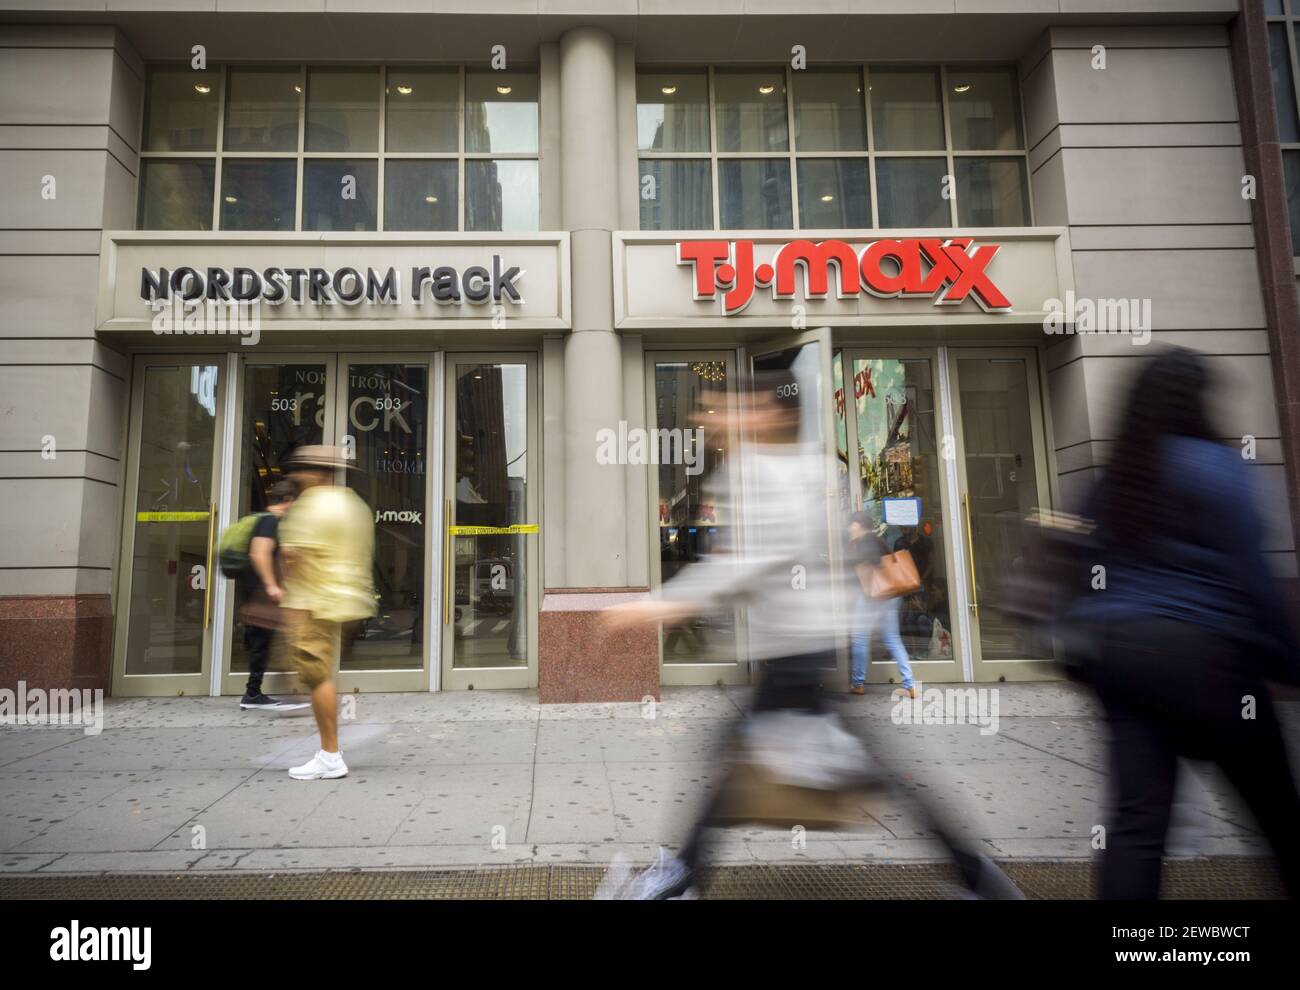 PHOTOS: Nordstrom Rack and T.J. Maxx open at Fulton Mall